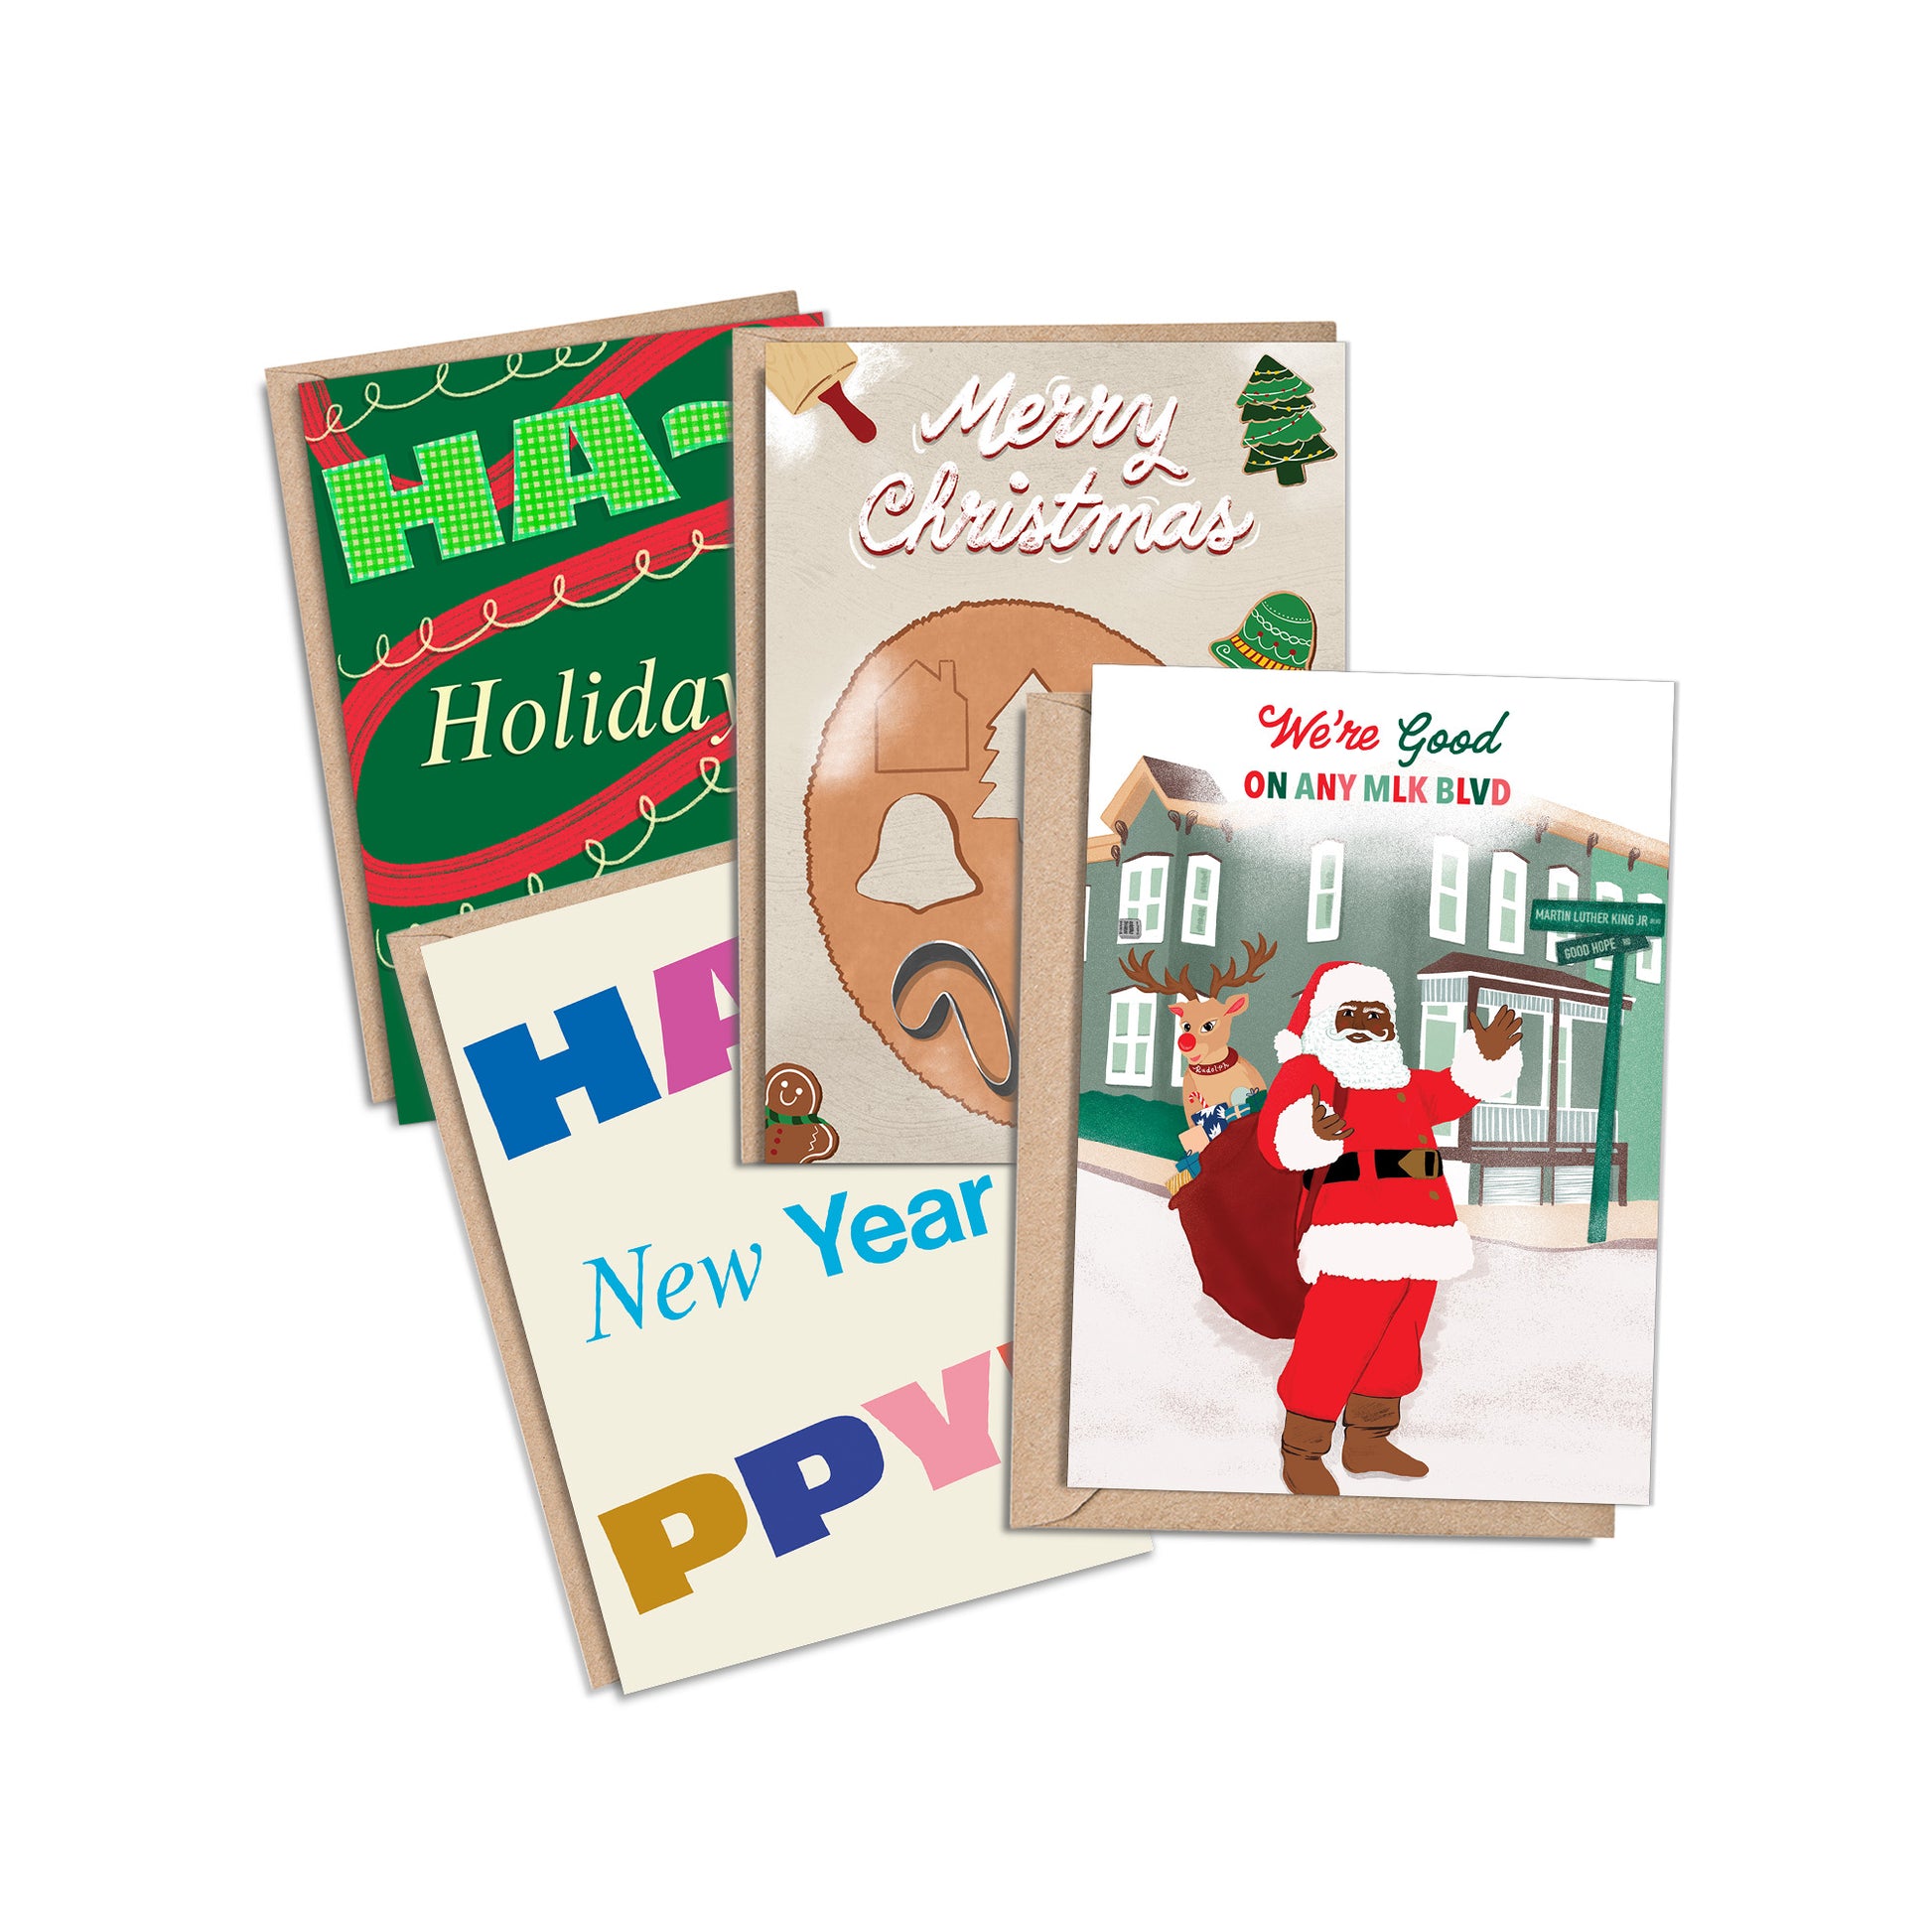 Set of 8, 5x7" Holiday Cards. Assortment of our 5x7" Holiday Christmas Happy New Year Card Collection. Greeting Card Set from Goods Made By Digitrillnana, Ashley Fletcher. Colorful greeting cards. Black Woman Owned.